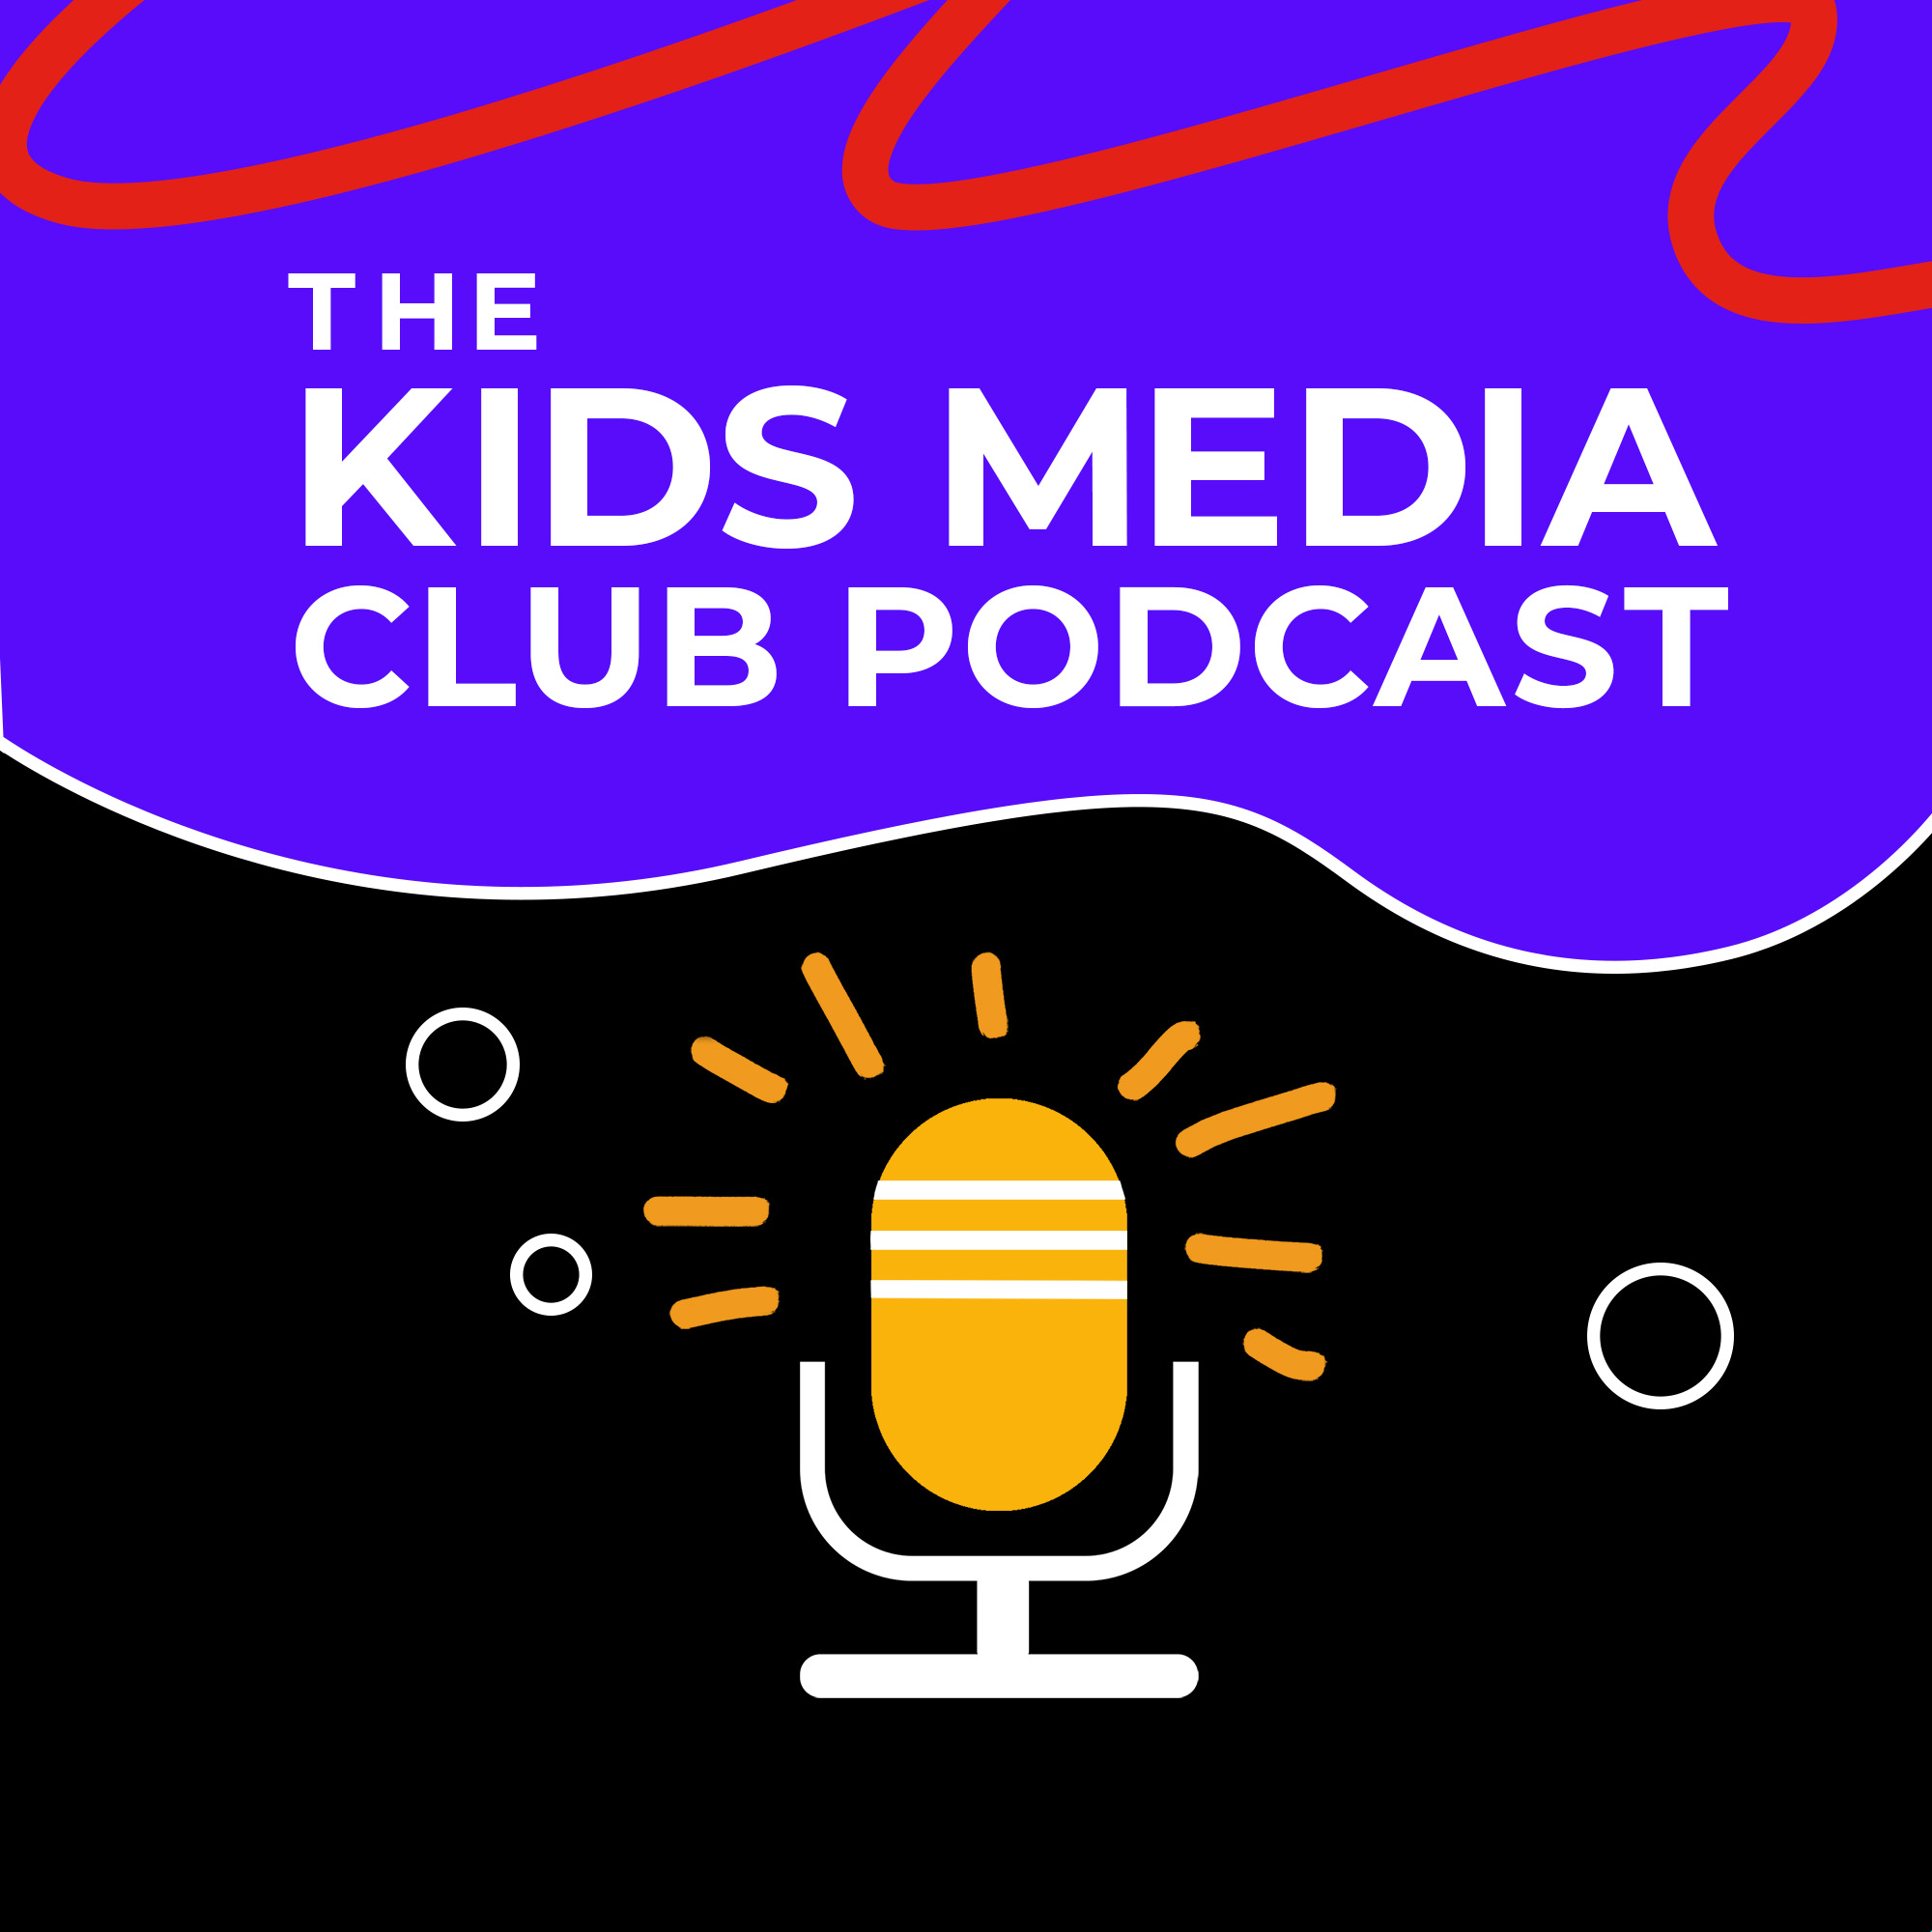 Kids Media Club Podcast: Creating a hit children's show- A Conversation with Keith Chapman